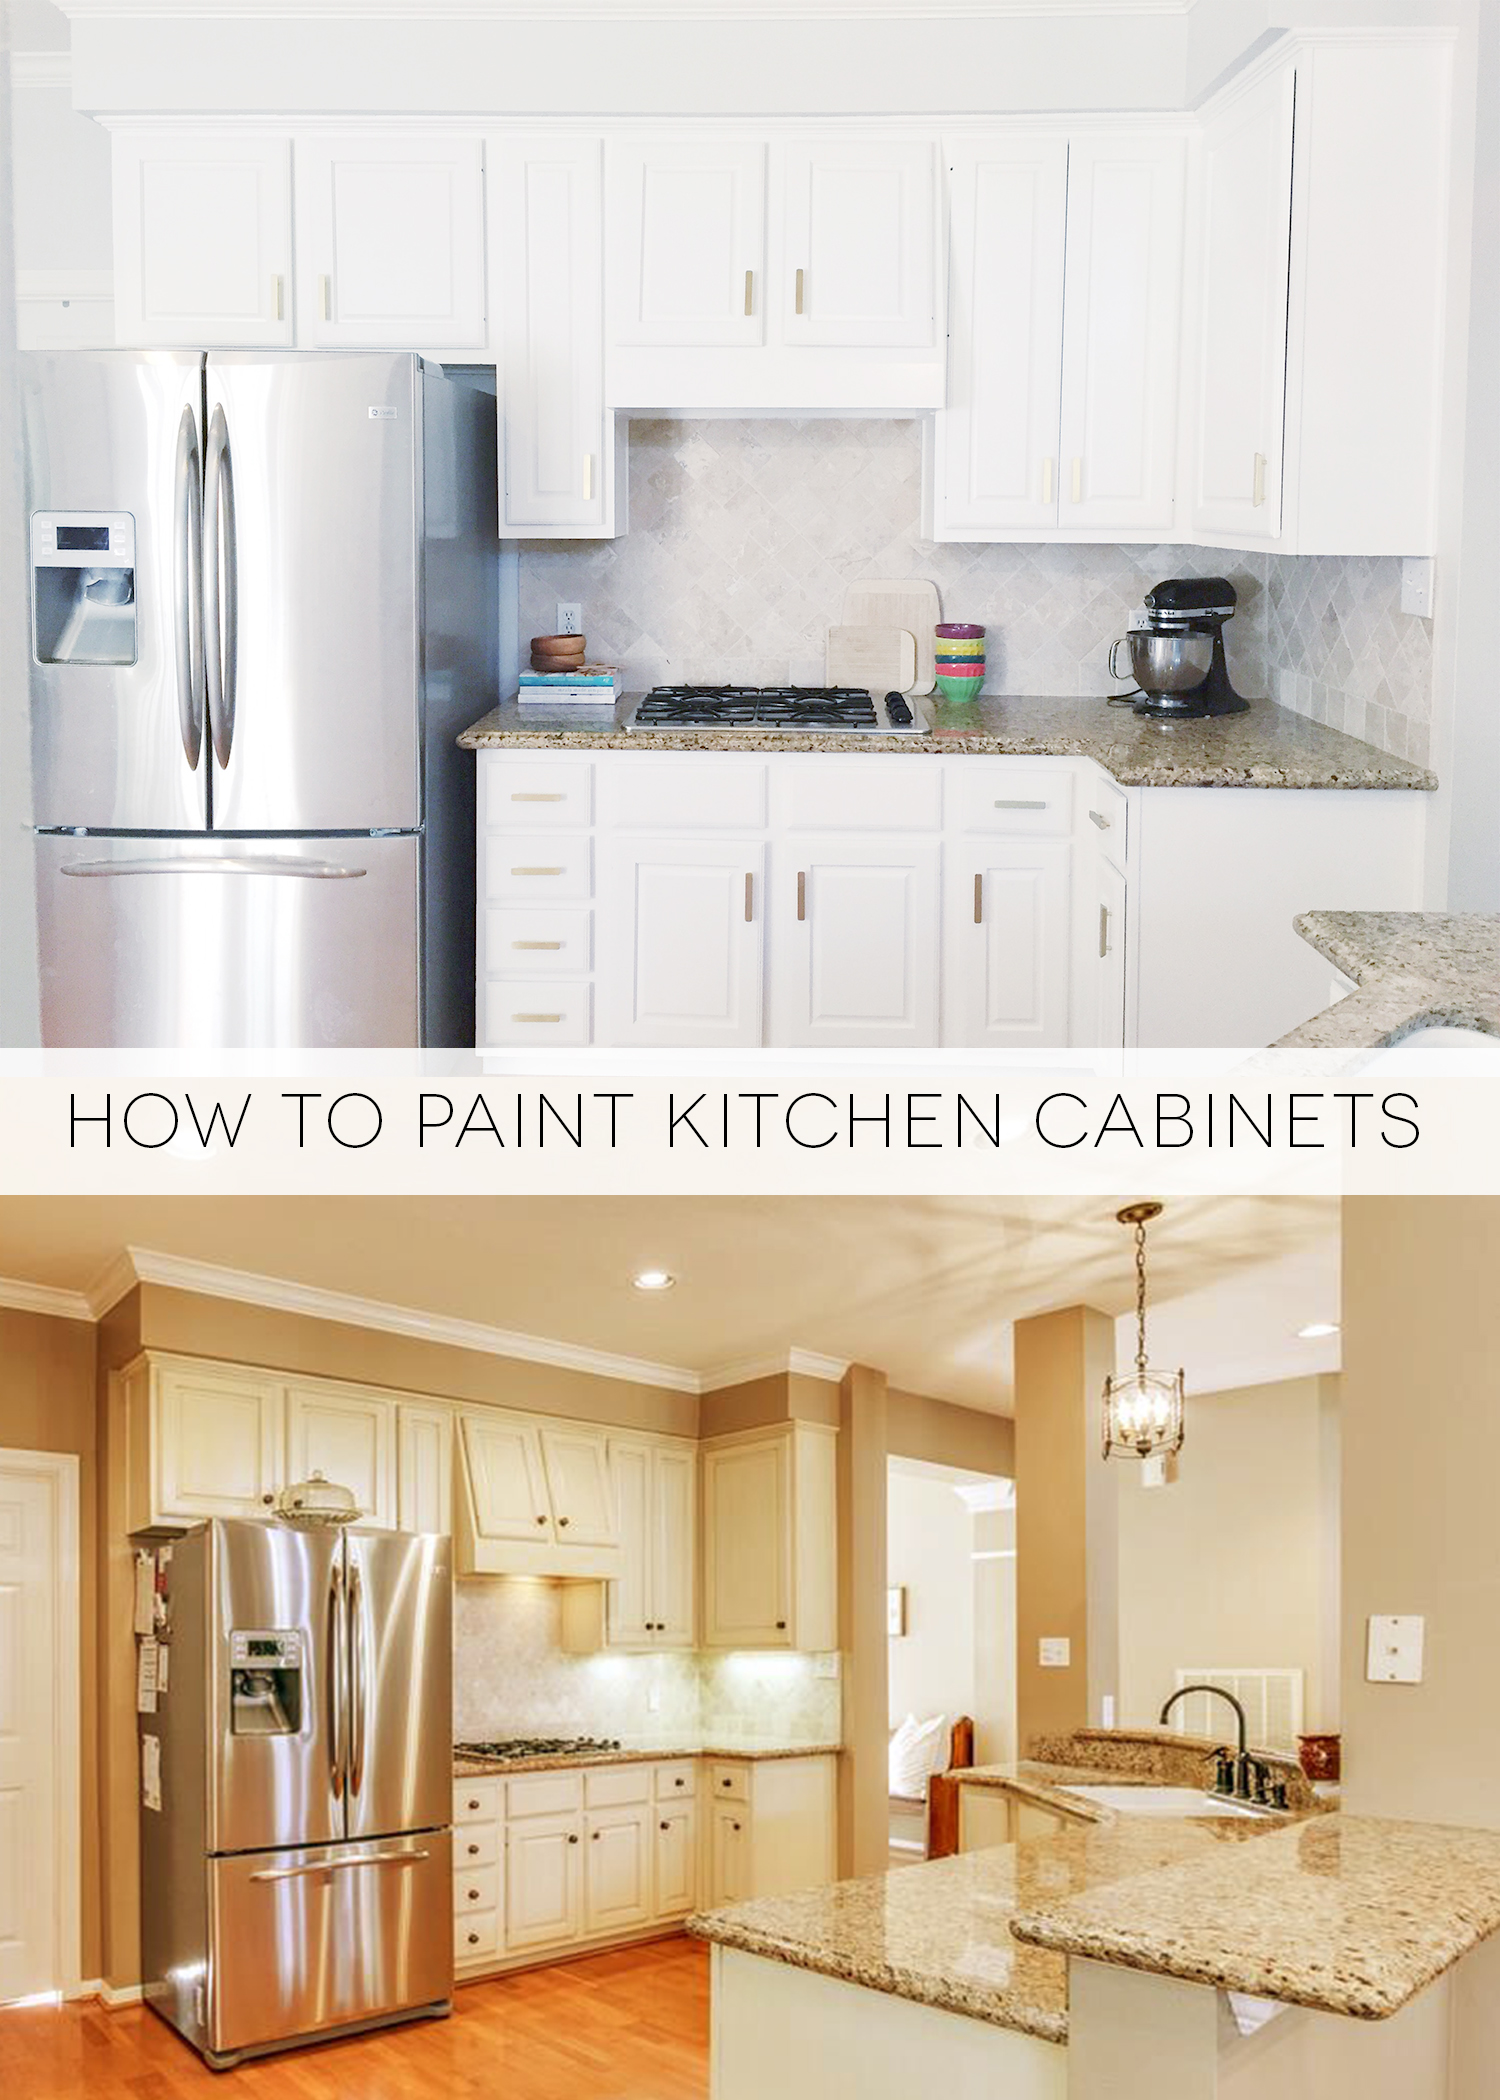 How To Paint Kitchen Cabinets - Plum Street Collective